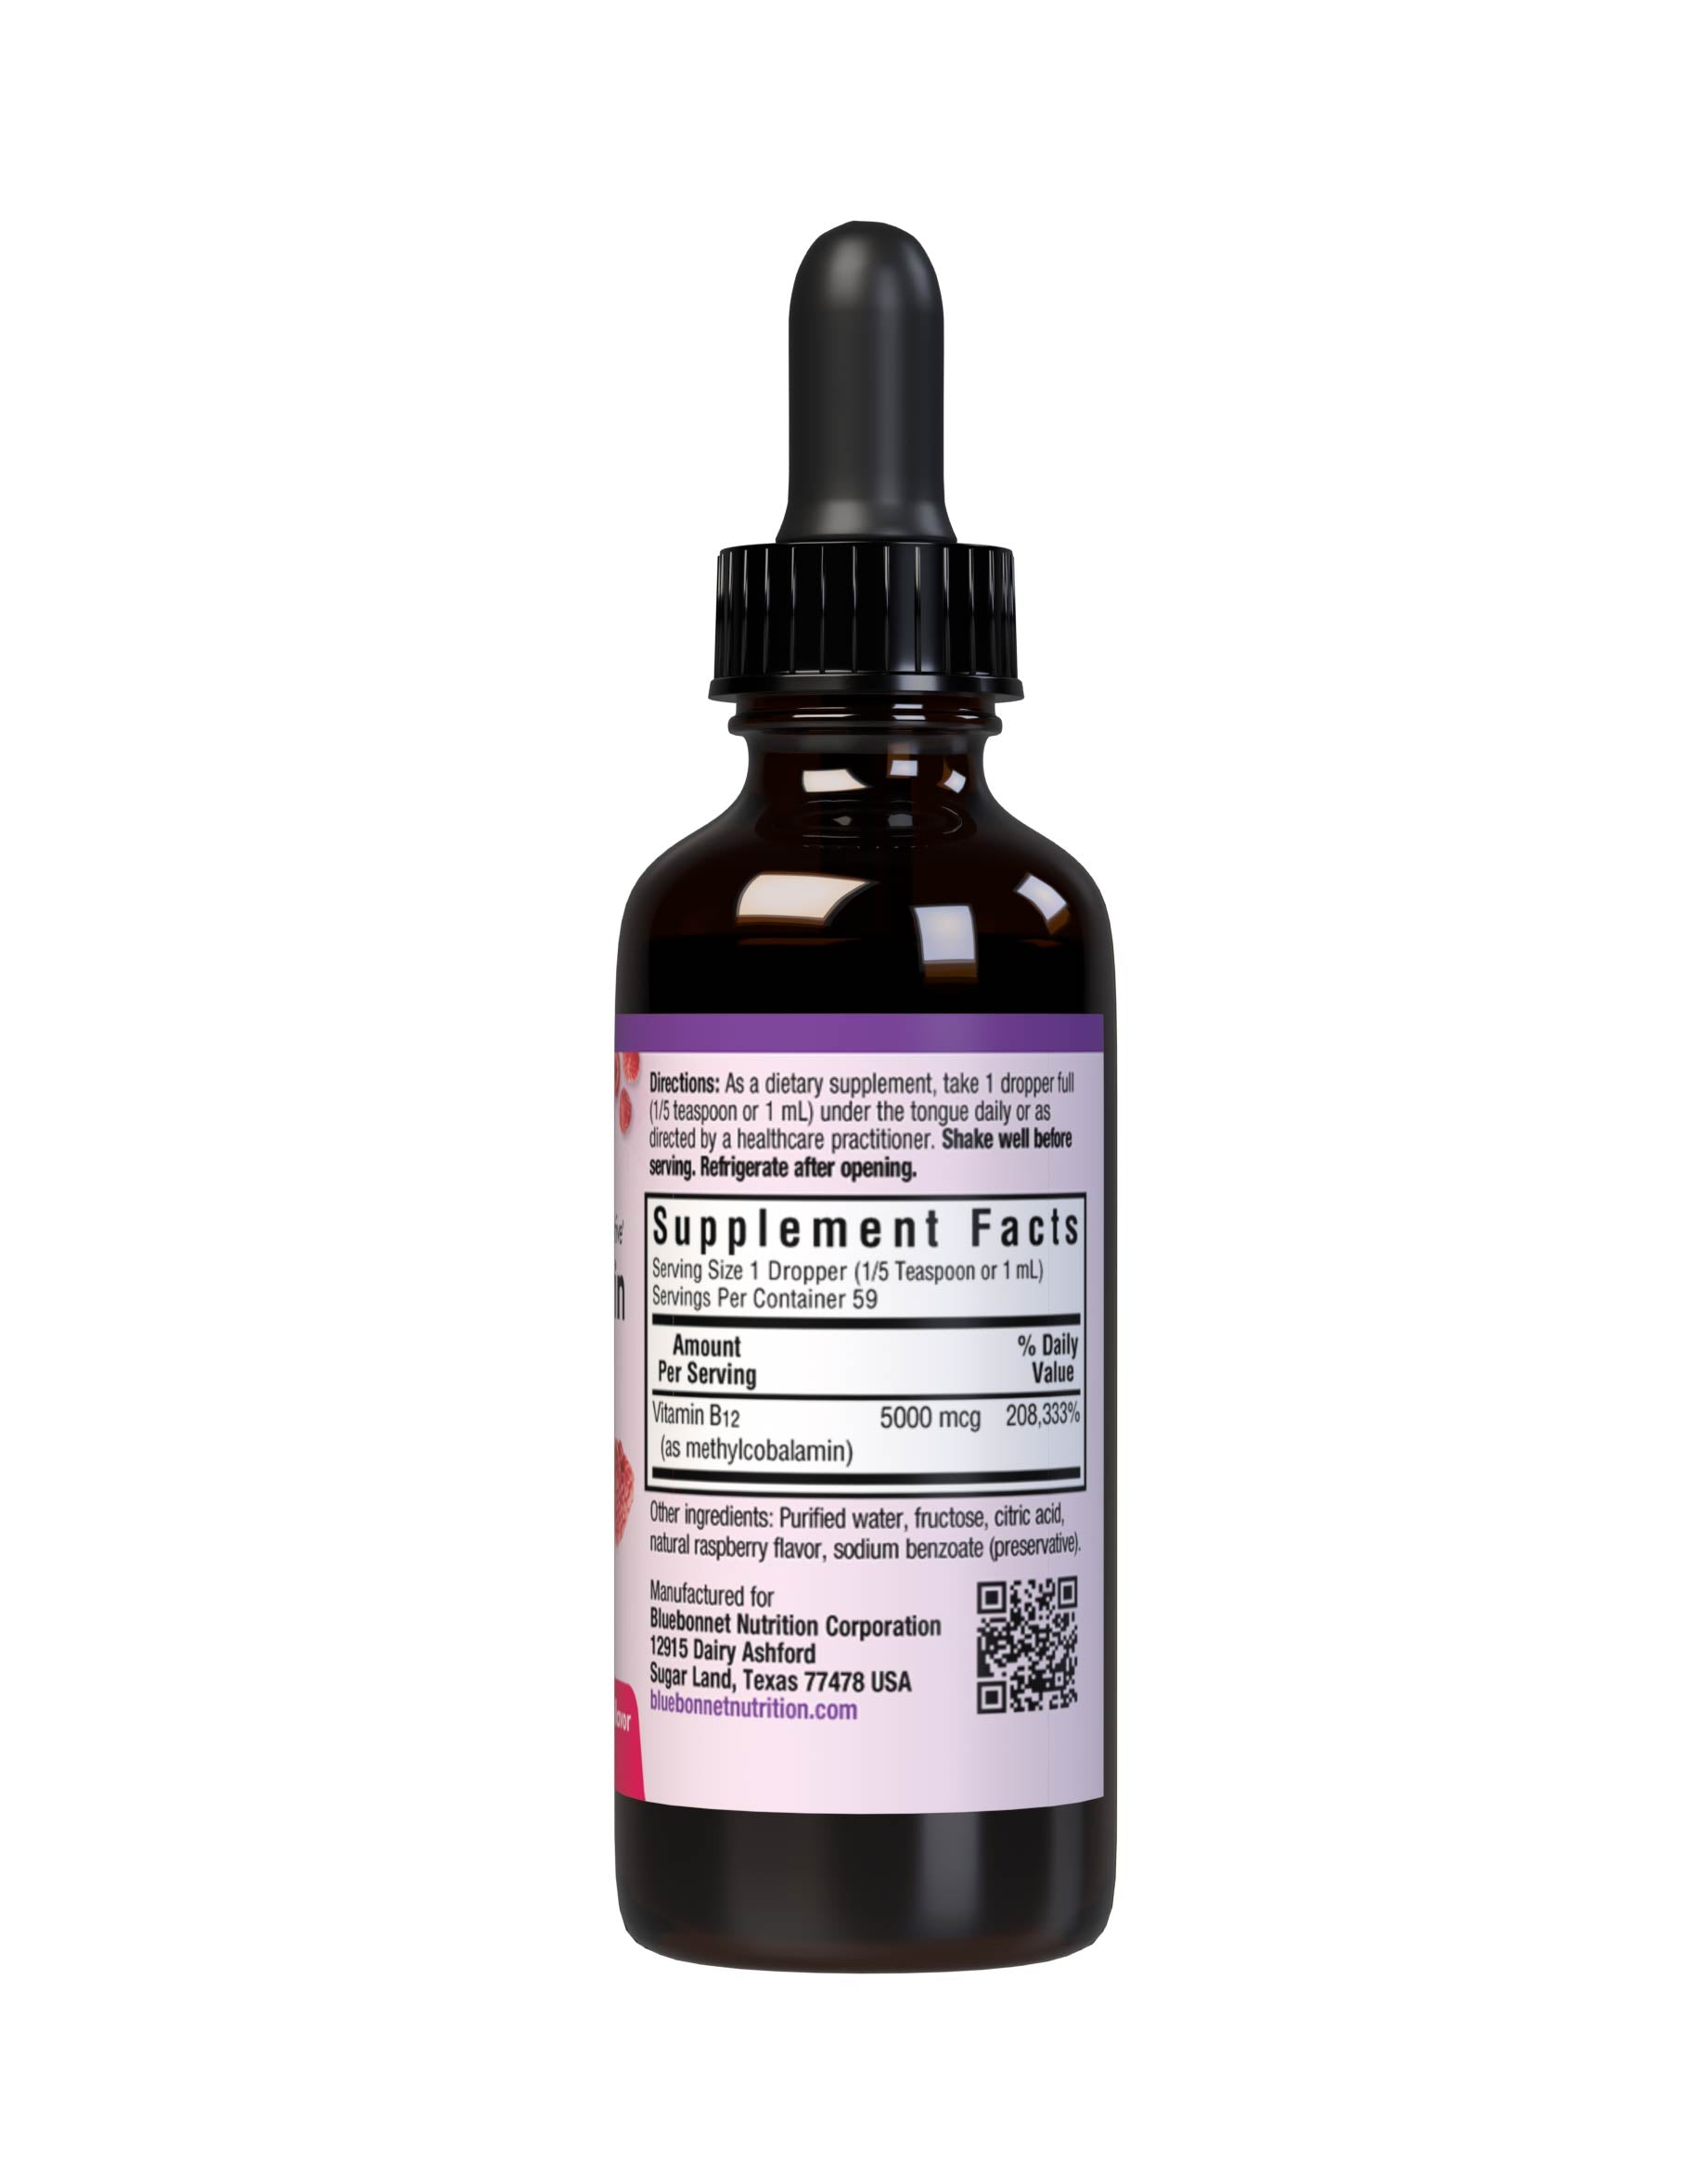 Bluebonnet’s Liquid CellularActive Methylcobalamin Vitamin B12 5000 mcg is formulated with fast-acting vitamin B12 as methylcobalamin, a coenzyme form of B12, which may be better utilized and better retained in the body. Vitamin B12 supports cellular energy production and nervous system health. Supplement facts panel. #size_2 fl oz